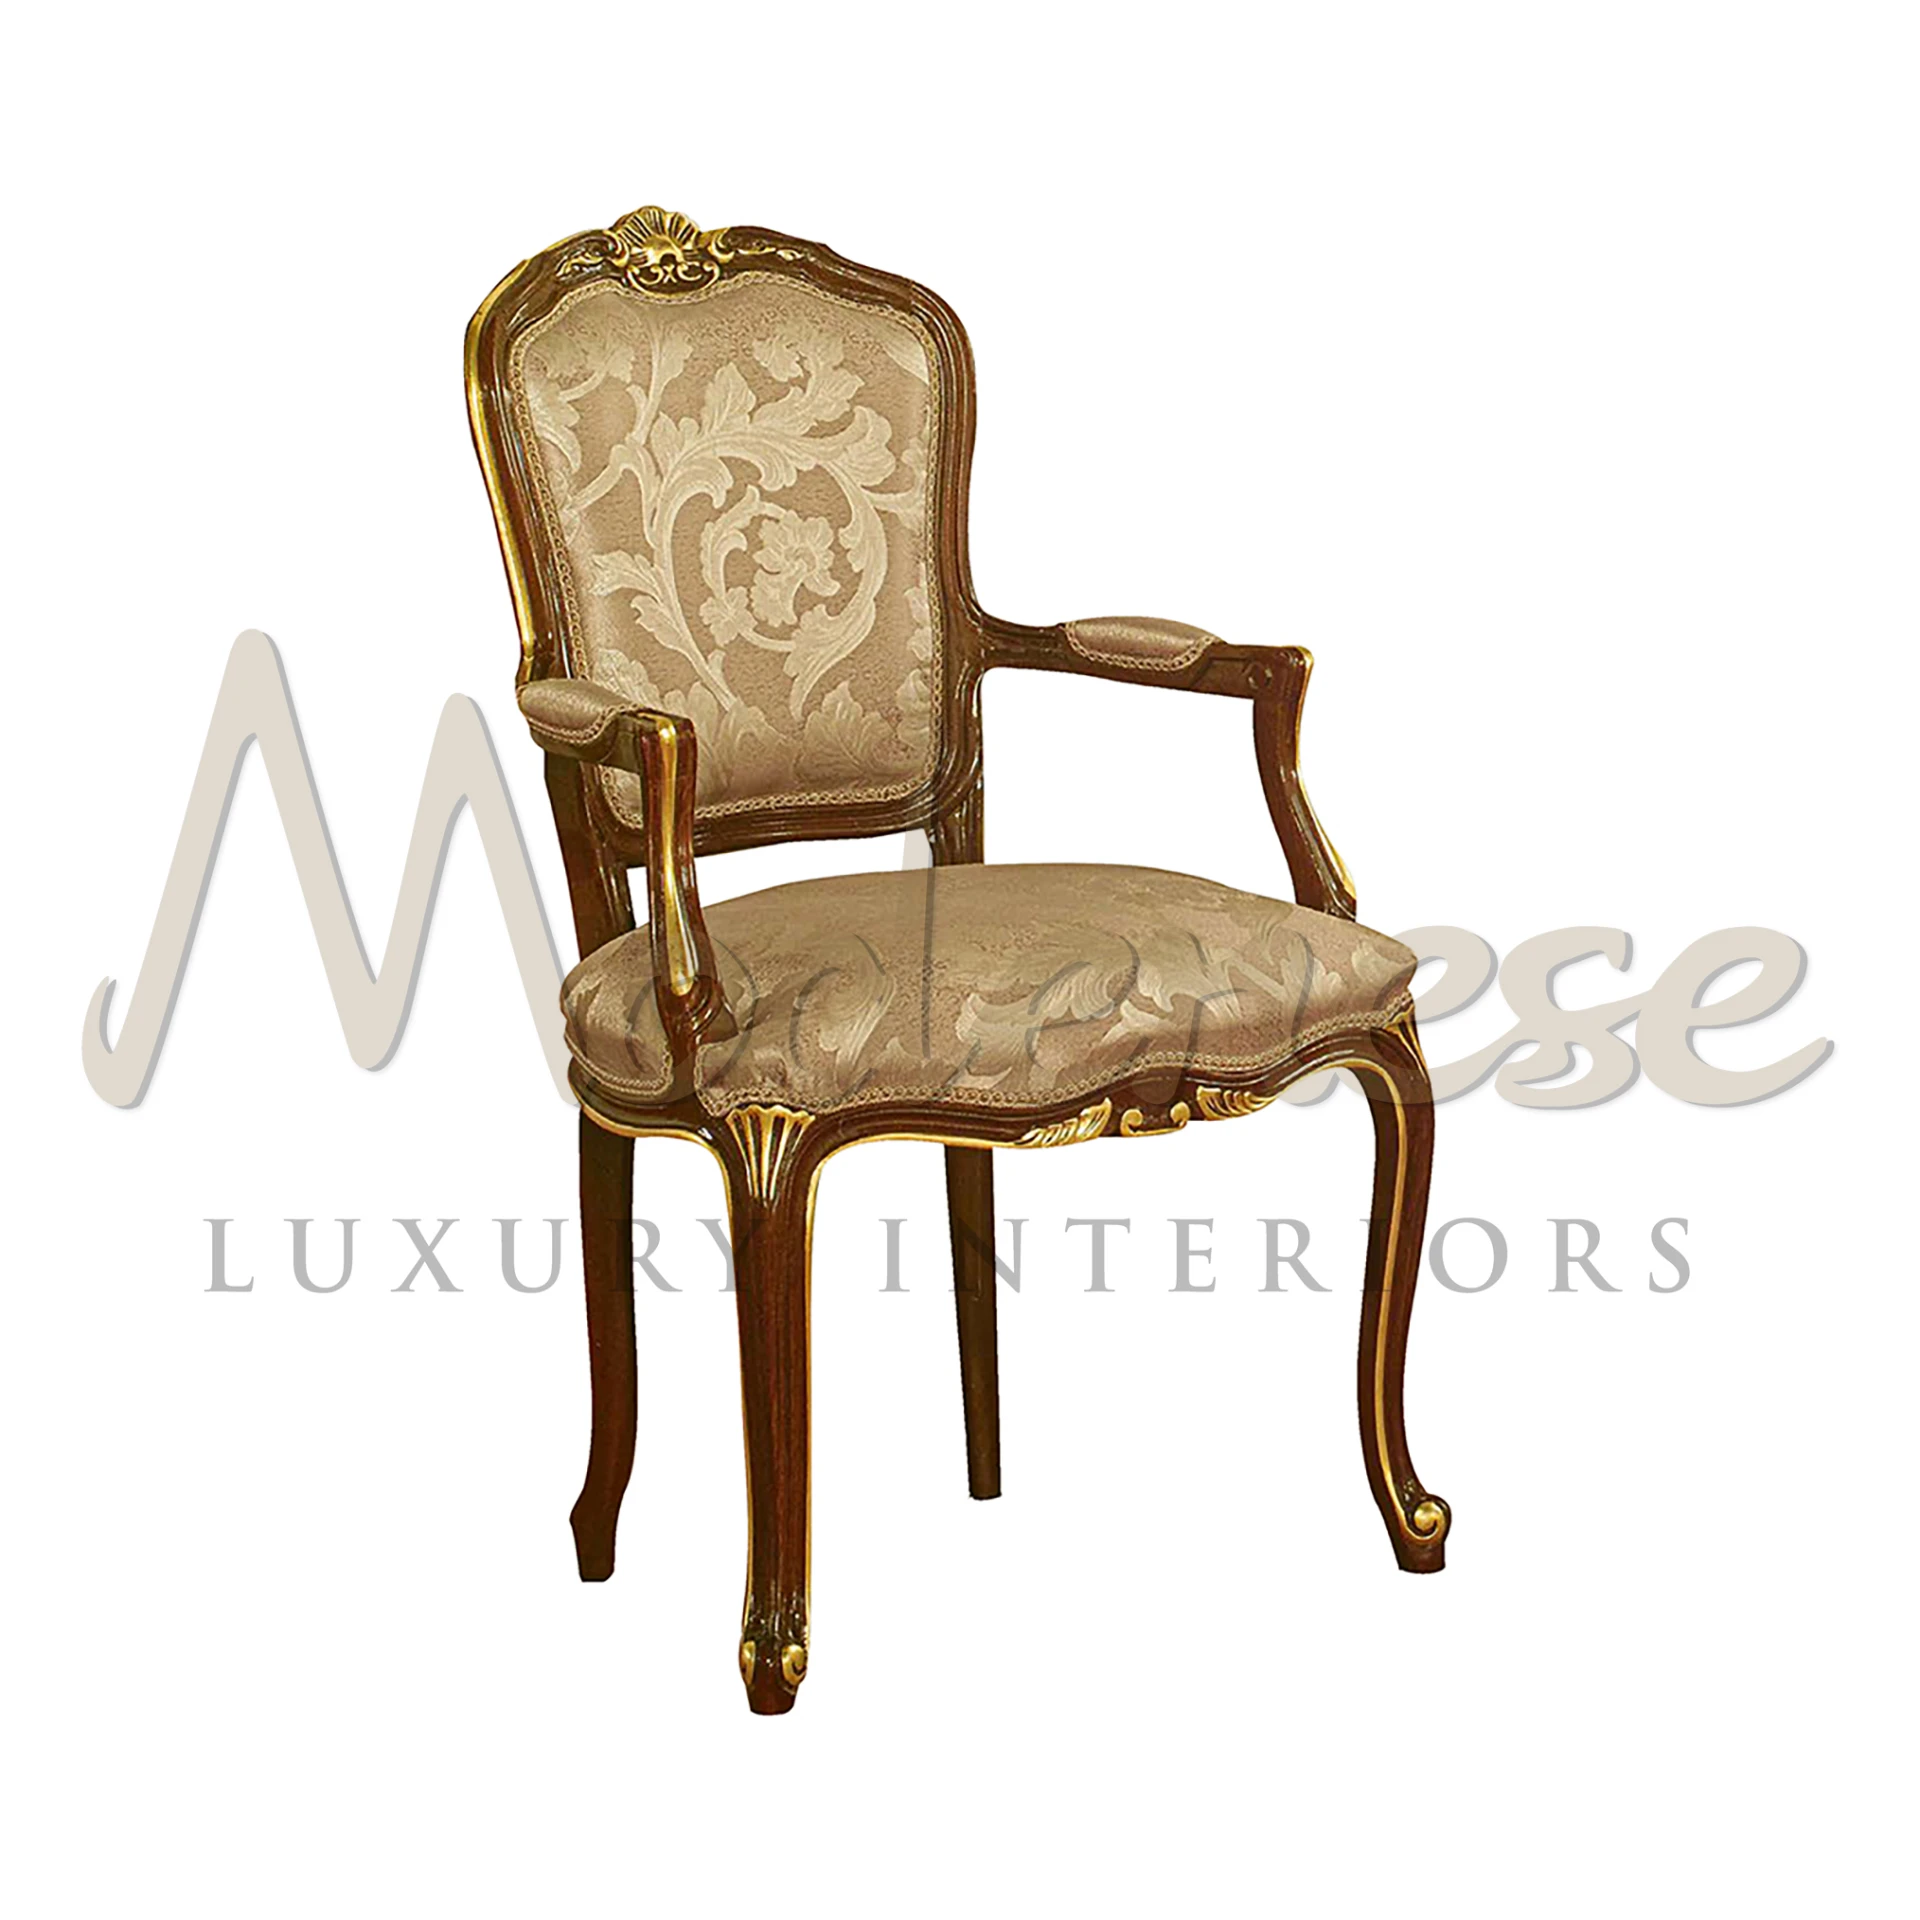 Handcrafted with premium fabric, intricate gold leaf, and classic walnut finish, embodying ancient baroque traditions and Italian craftsmanship.